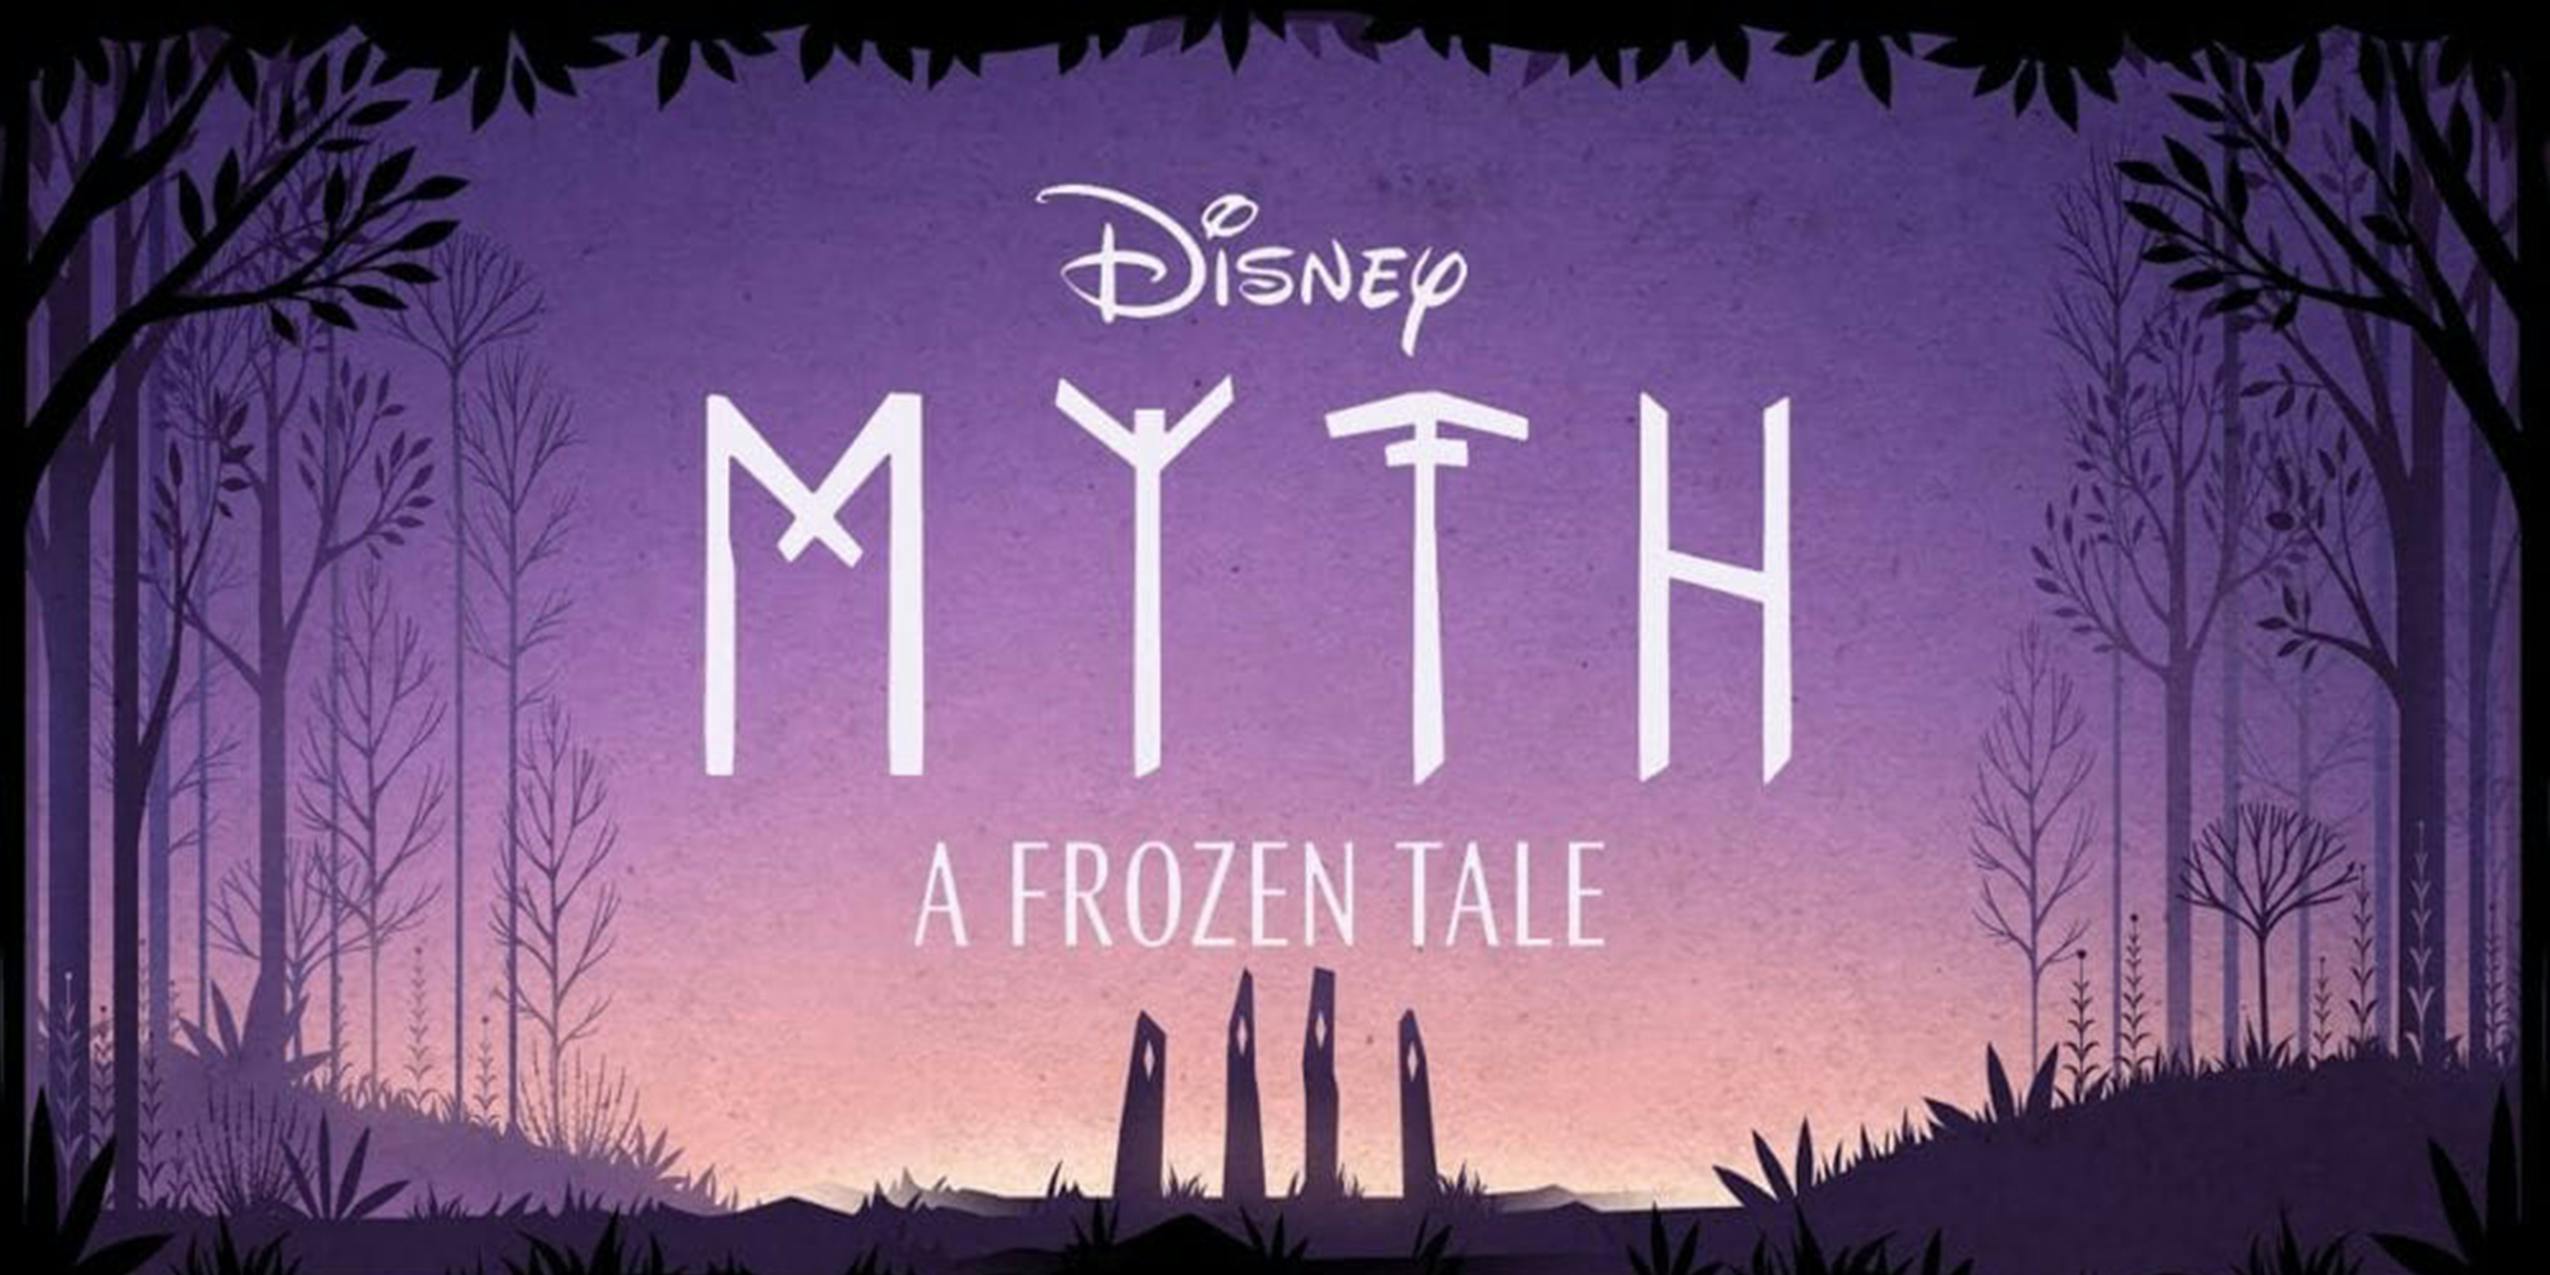 myth a frozen tale what's new on Disney Plus February 2021